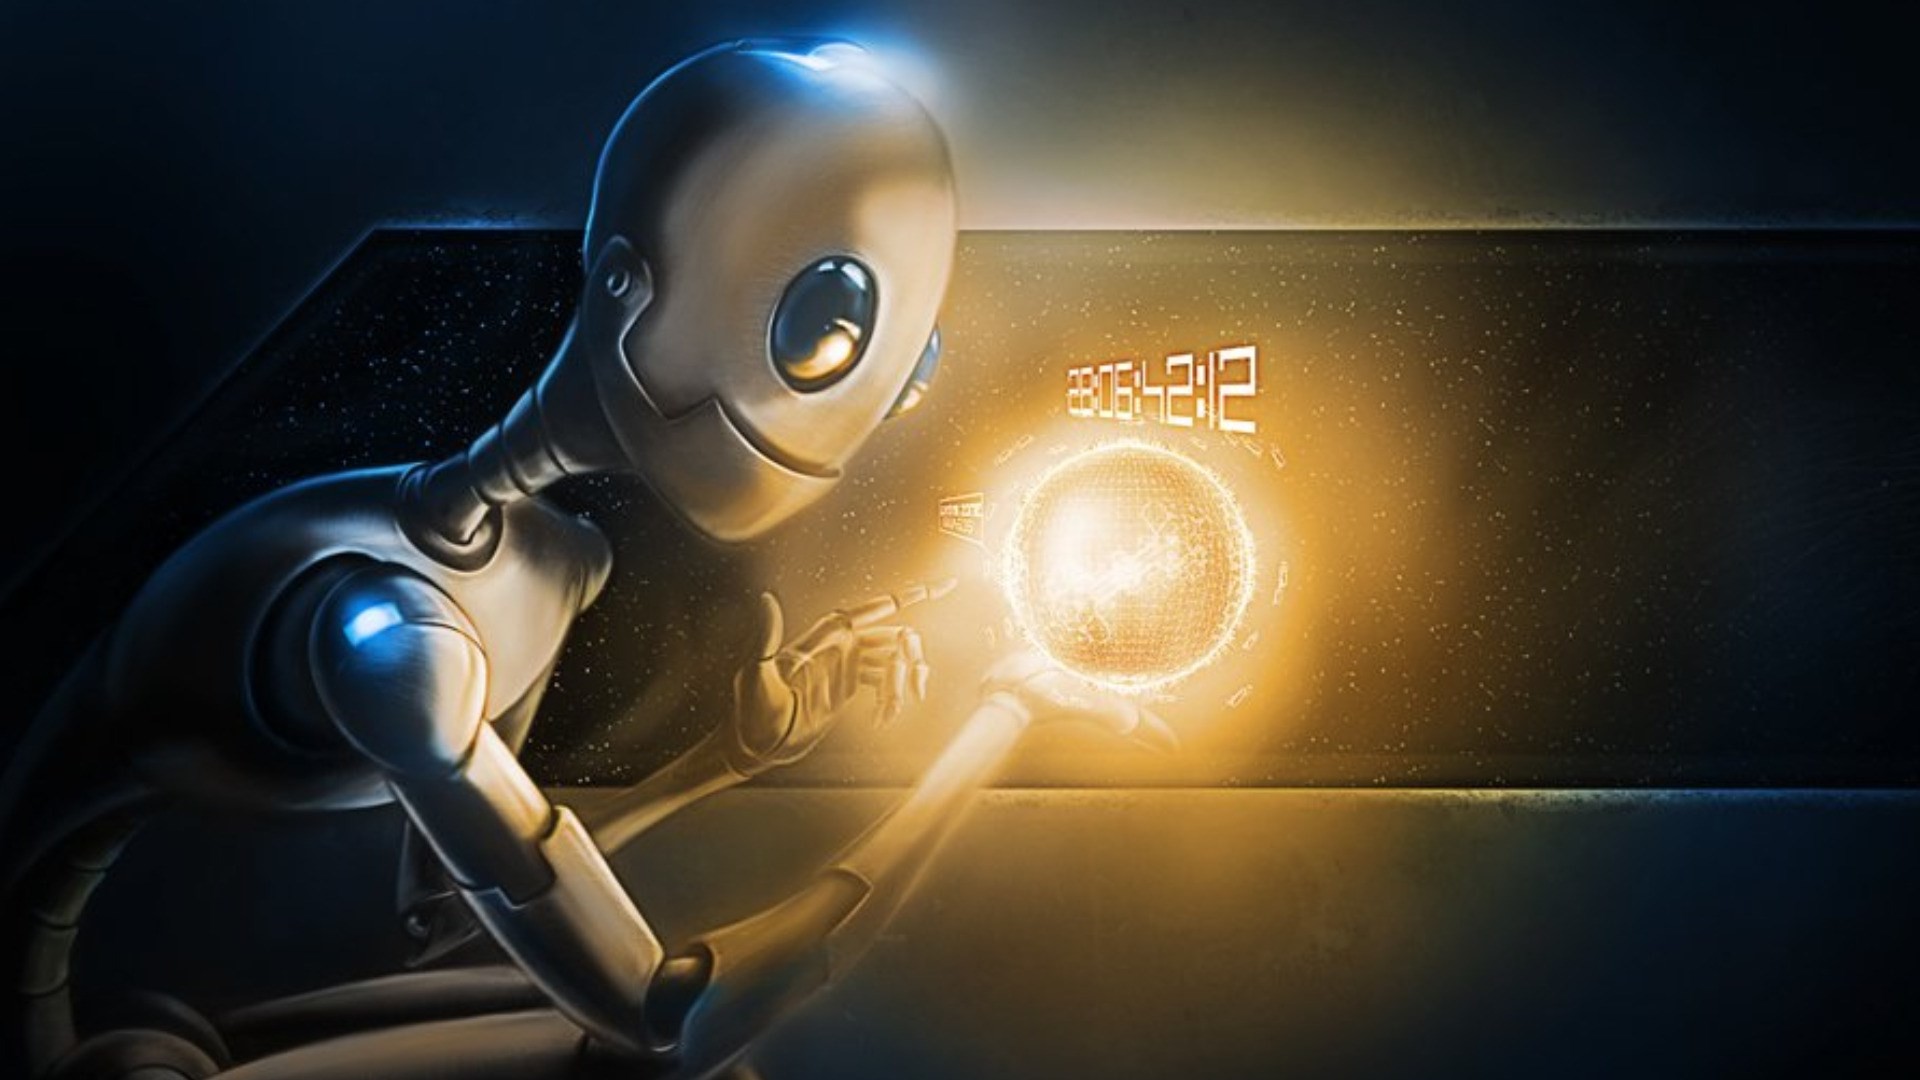 1920x1080 Free-computer-robot-pic-by-Dawn-Williams-wallpaper-